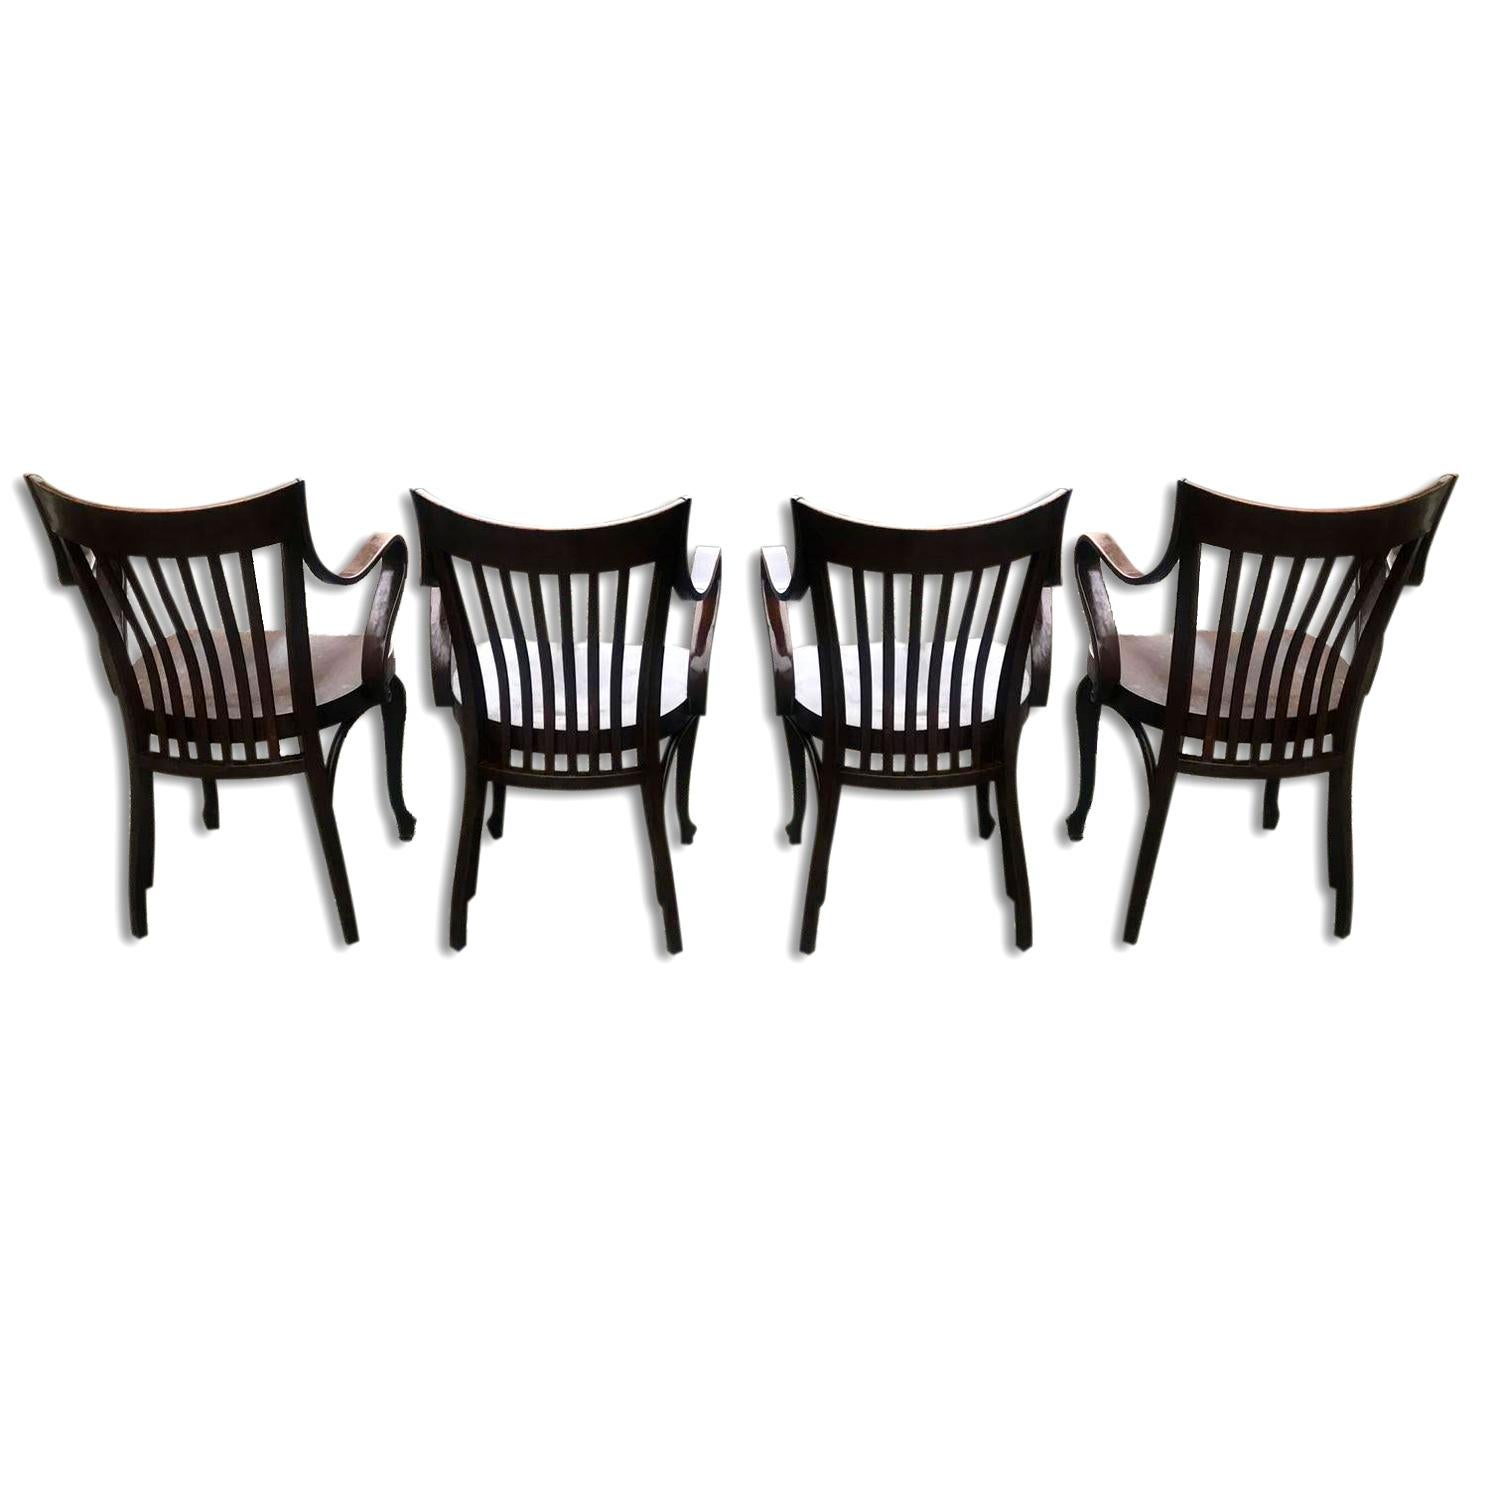 These chairs were designed in 1913 for the Café Capua in Vienna, manufactured by Thonet. It features a beech stained wood, impressed factory mark to the underside. The chairs are in very good original condition.

Literature.: E. B. Ottillinger,